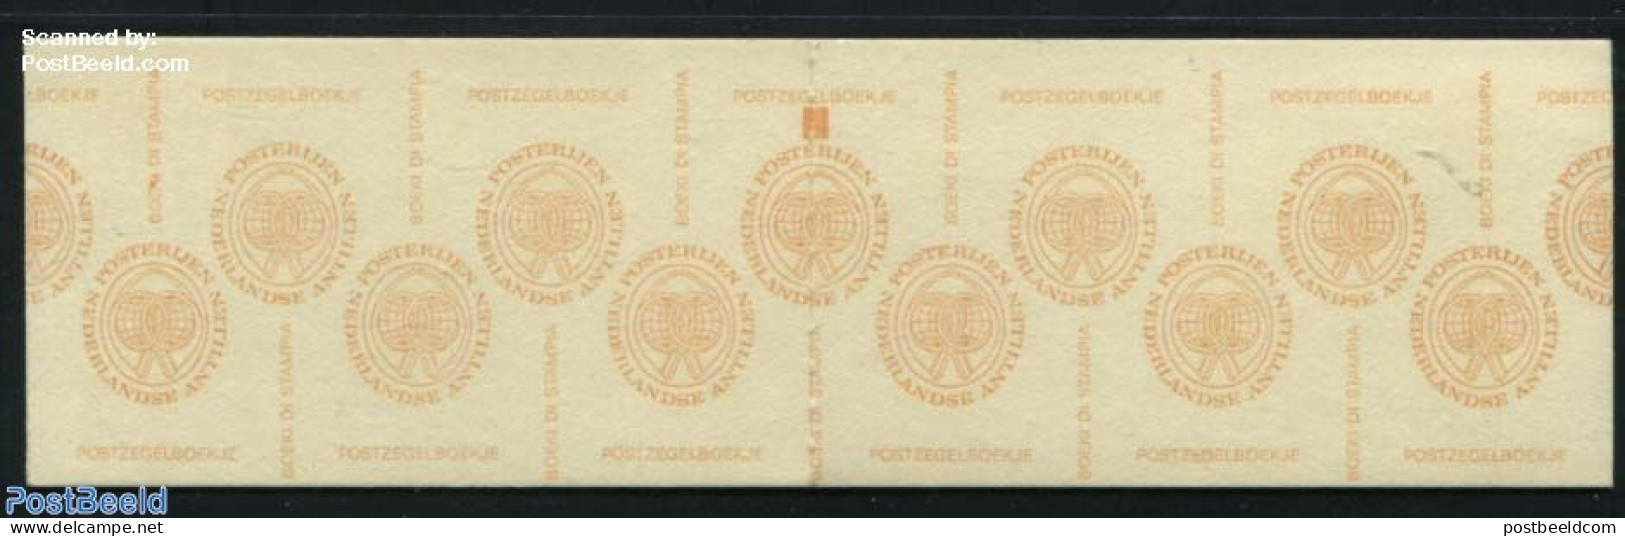 Netherlands Antilles 1980 Coronation Booklet With Counting Block On Cover, Mint NH, History - Kings & Queens (Royalty).. - Königshäuser, Adel